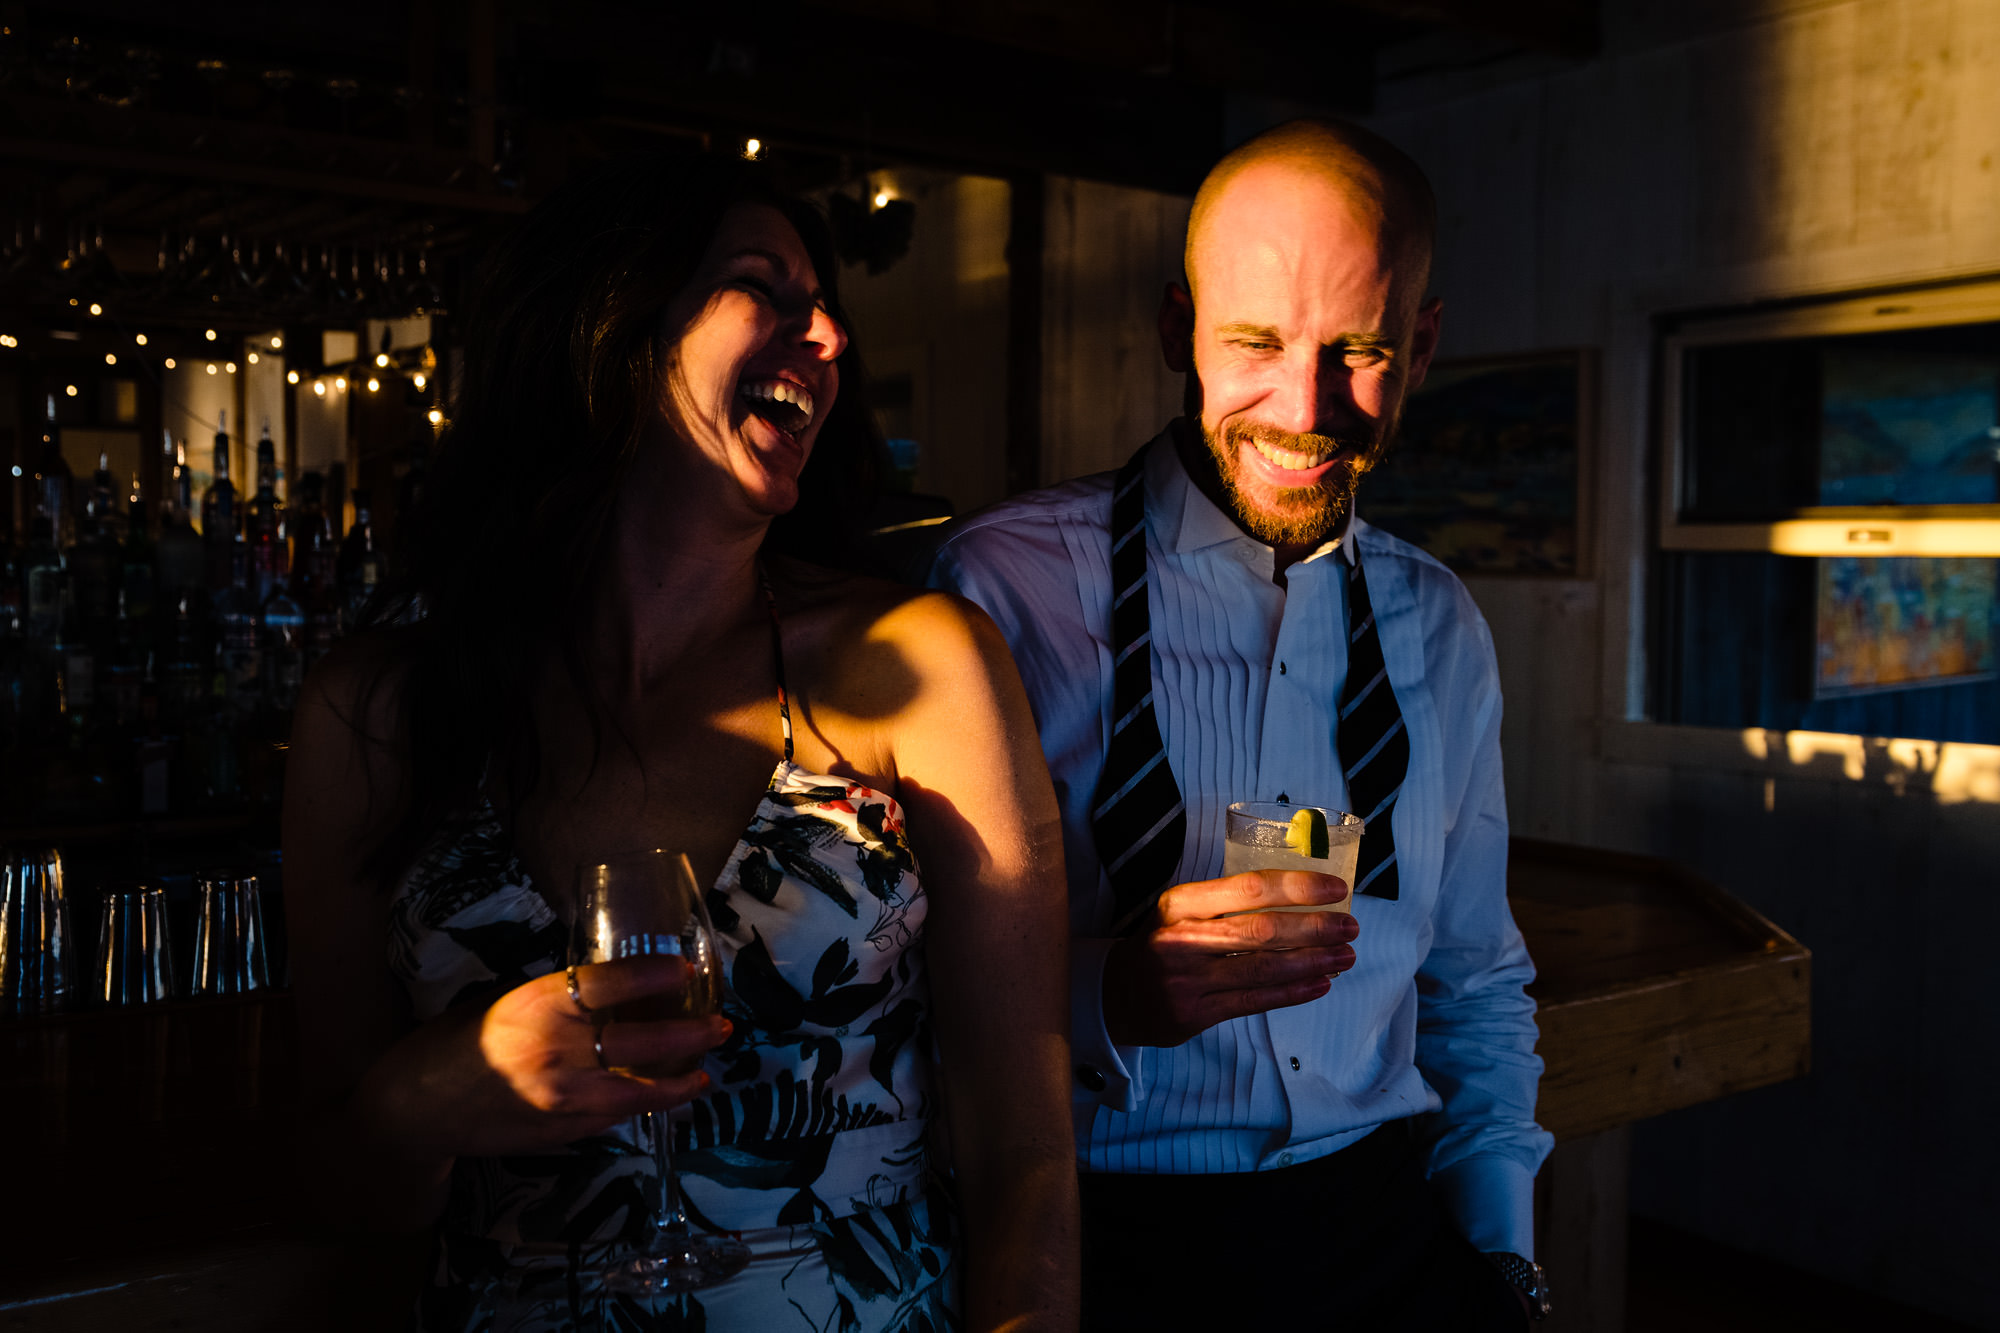 Wedding guests enjoyed themselves during the wedding reception at Islesford Dock Restaurant